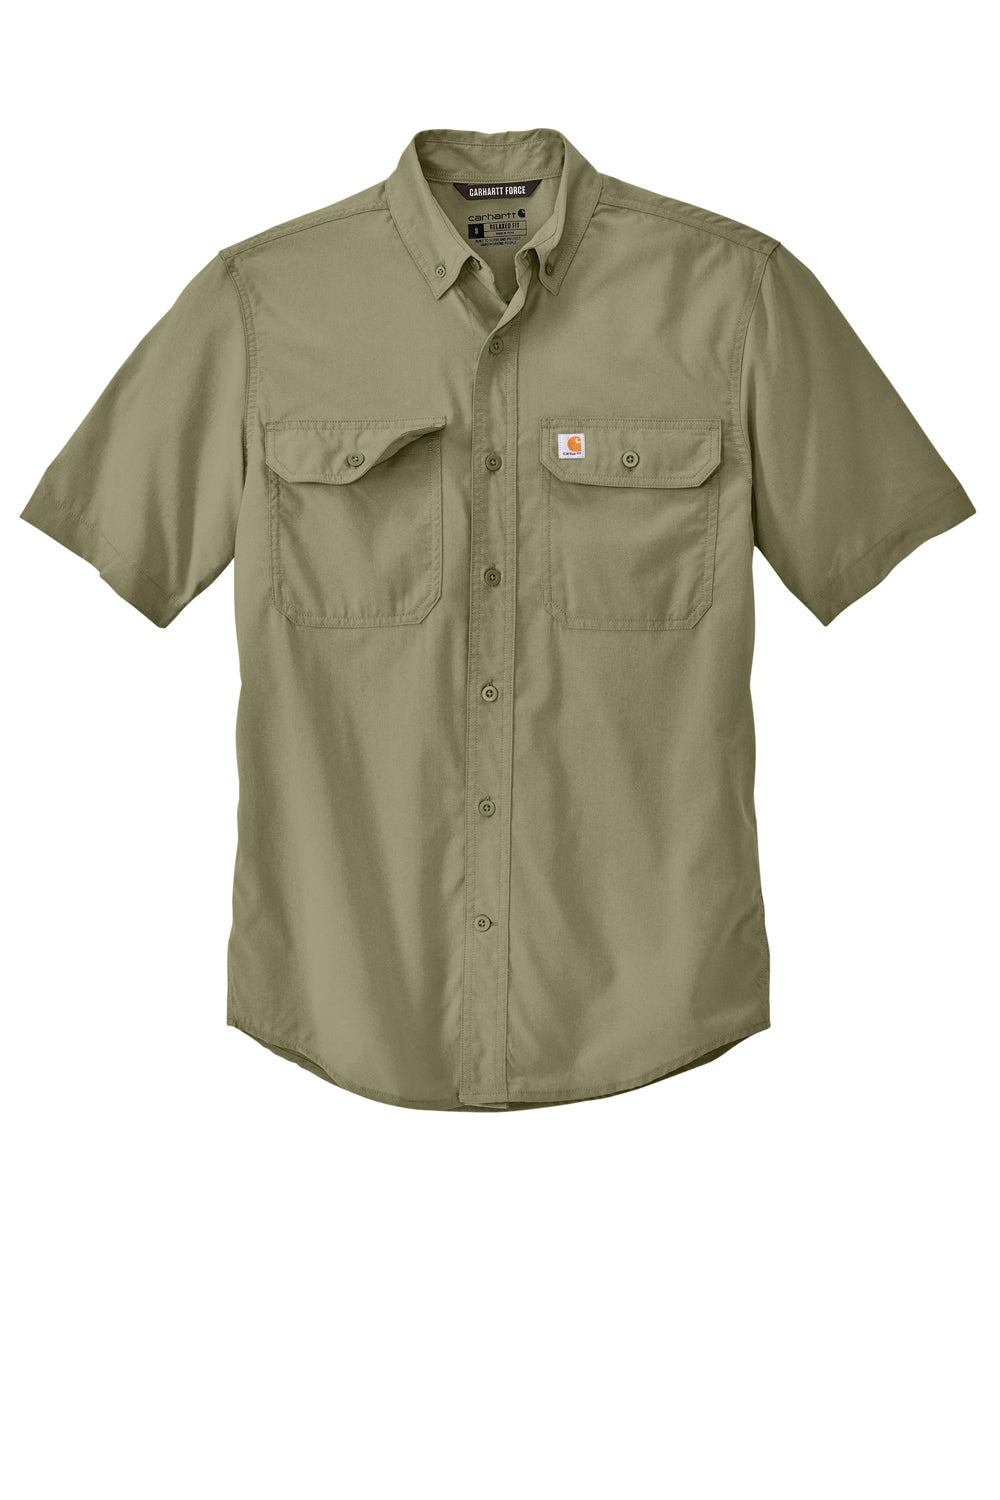 Carhartt CT105292 Mens Force Moisture Wicking Short Sleeve Button Down Shirt w/ Double Pockets Burnt Olive Green Flat Front